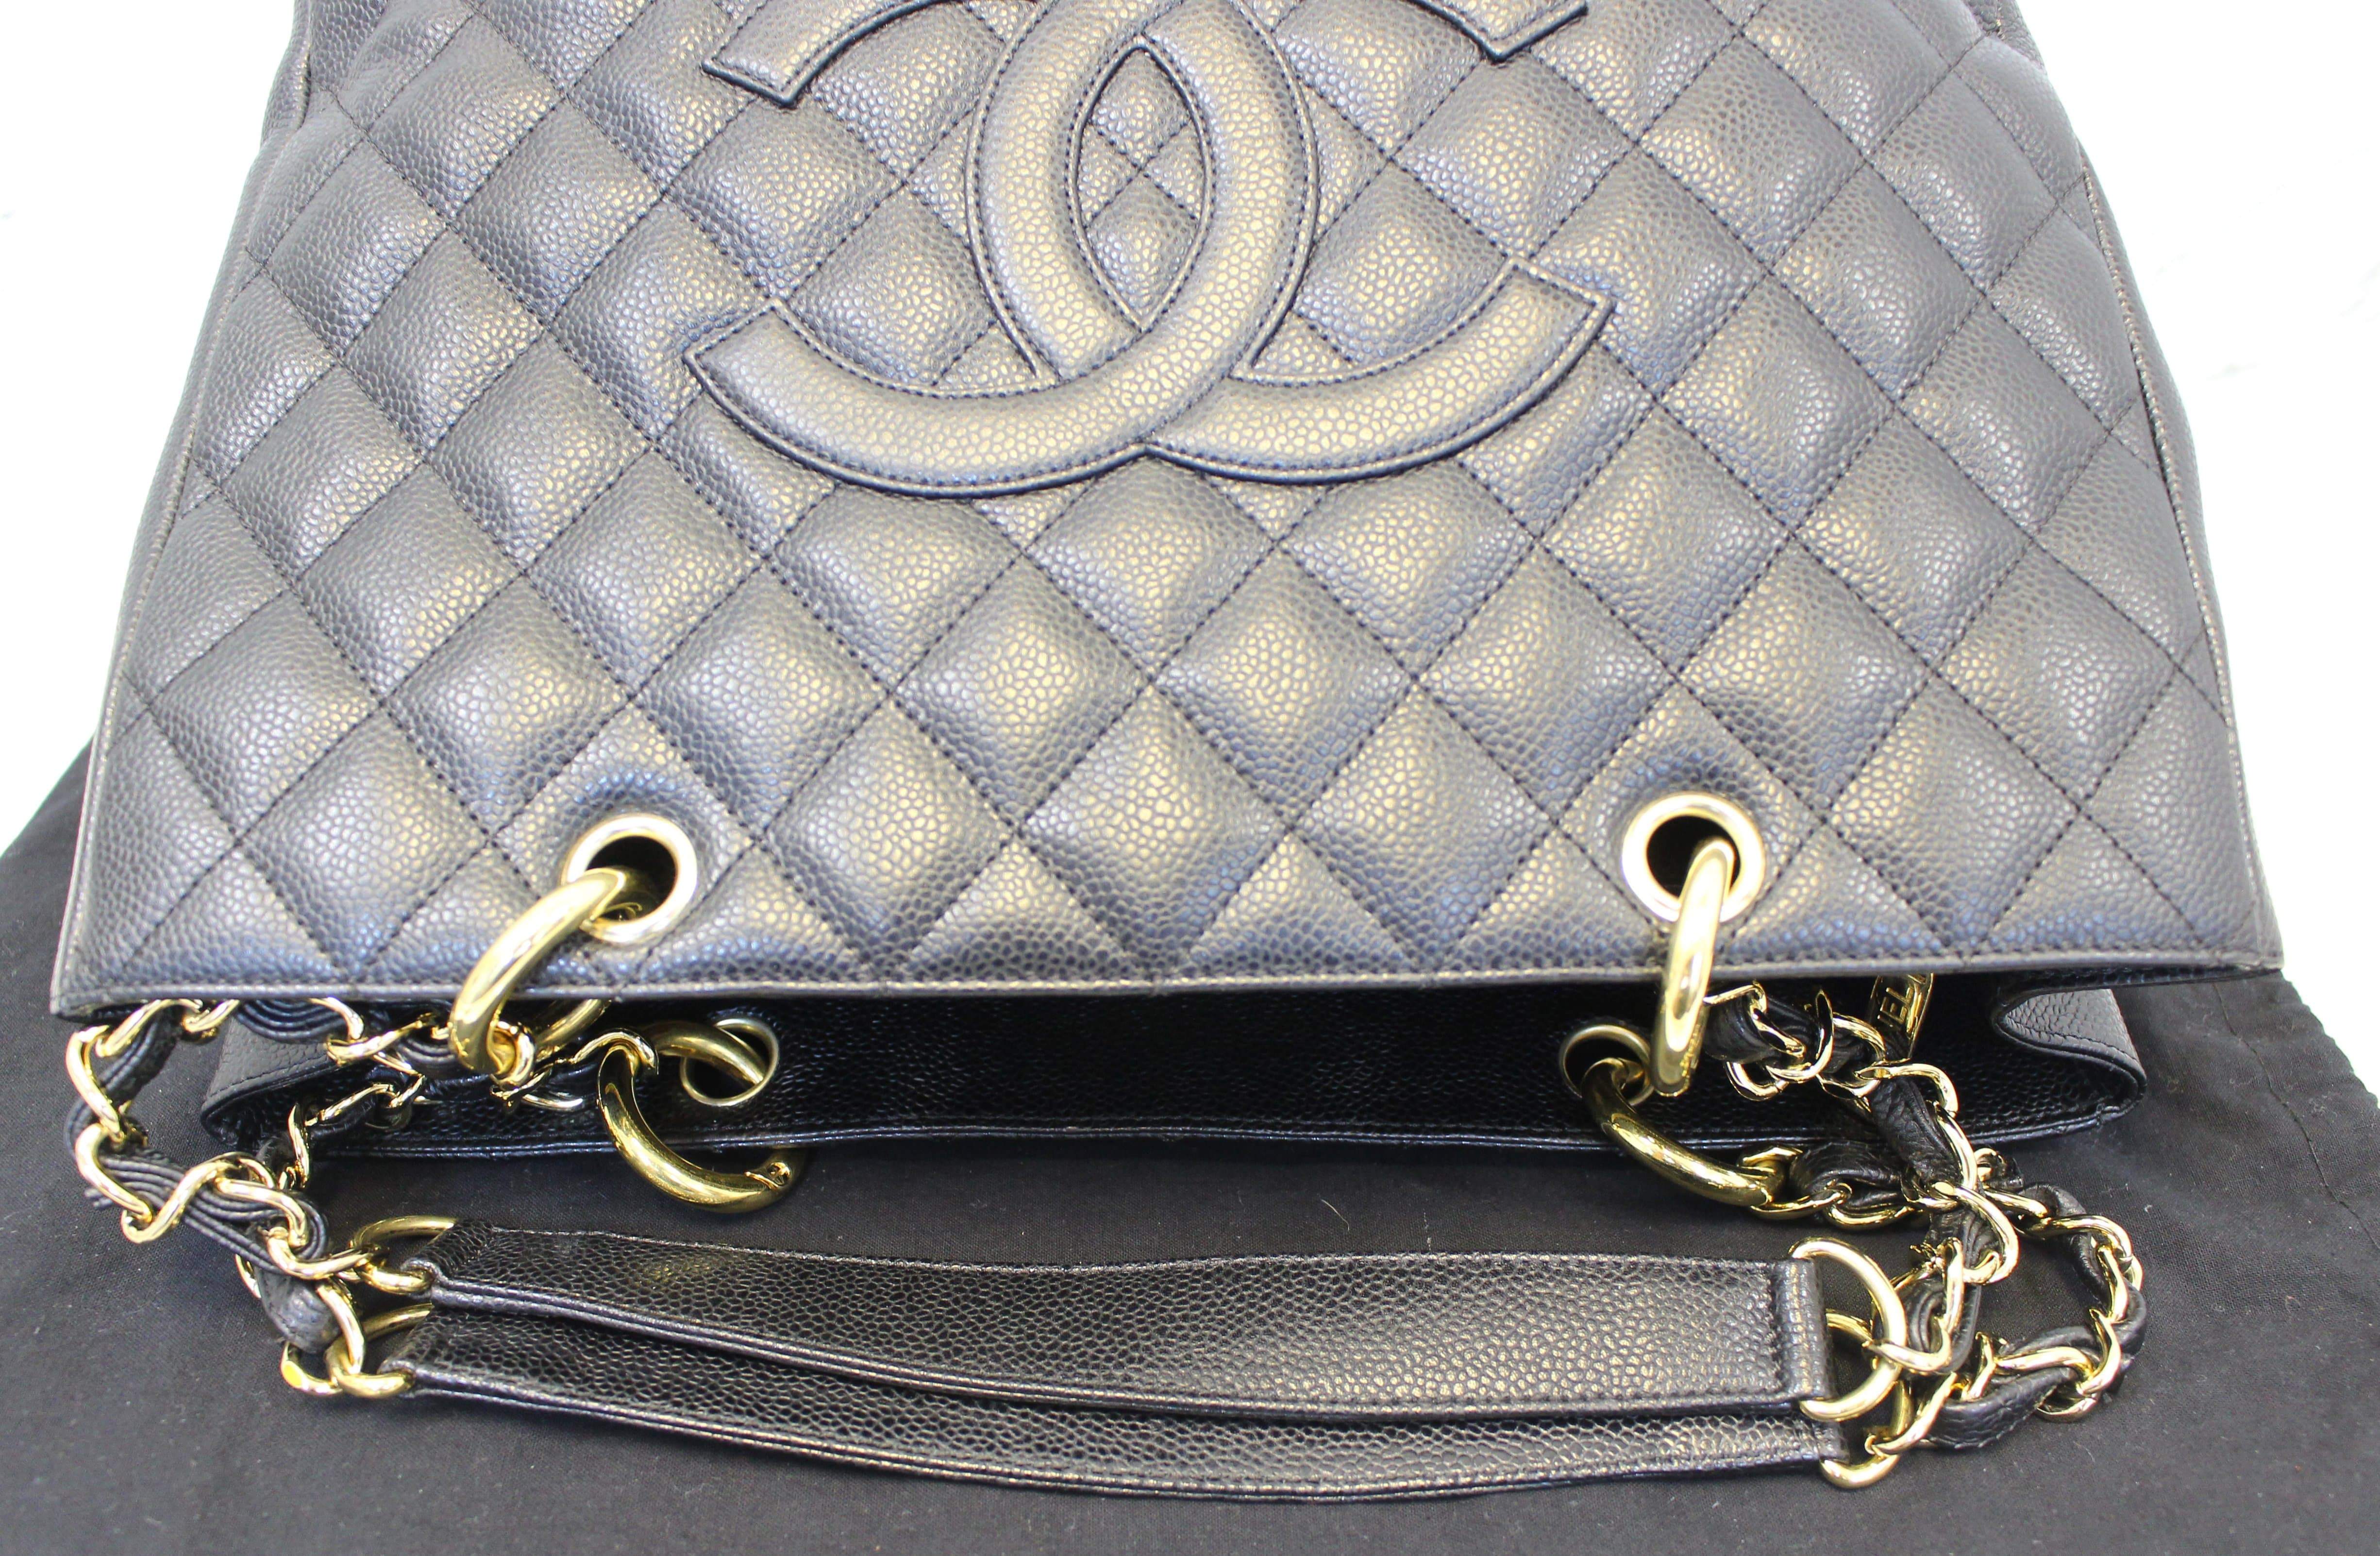 CHANEL Grand Shopping Caviar Leather GST Tote Bag Black - Sold